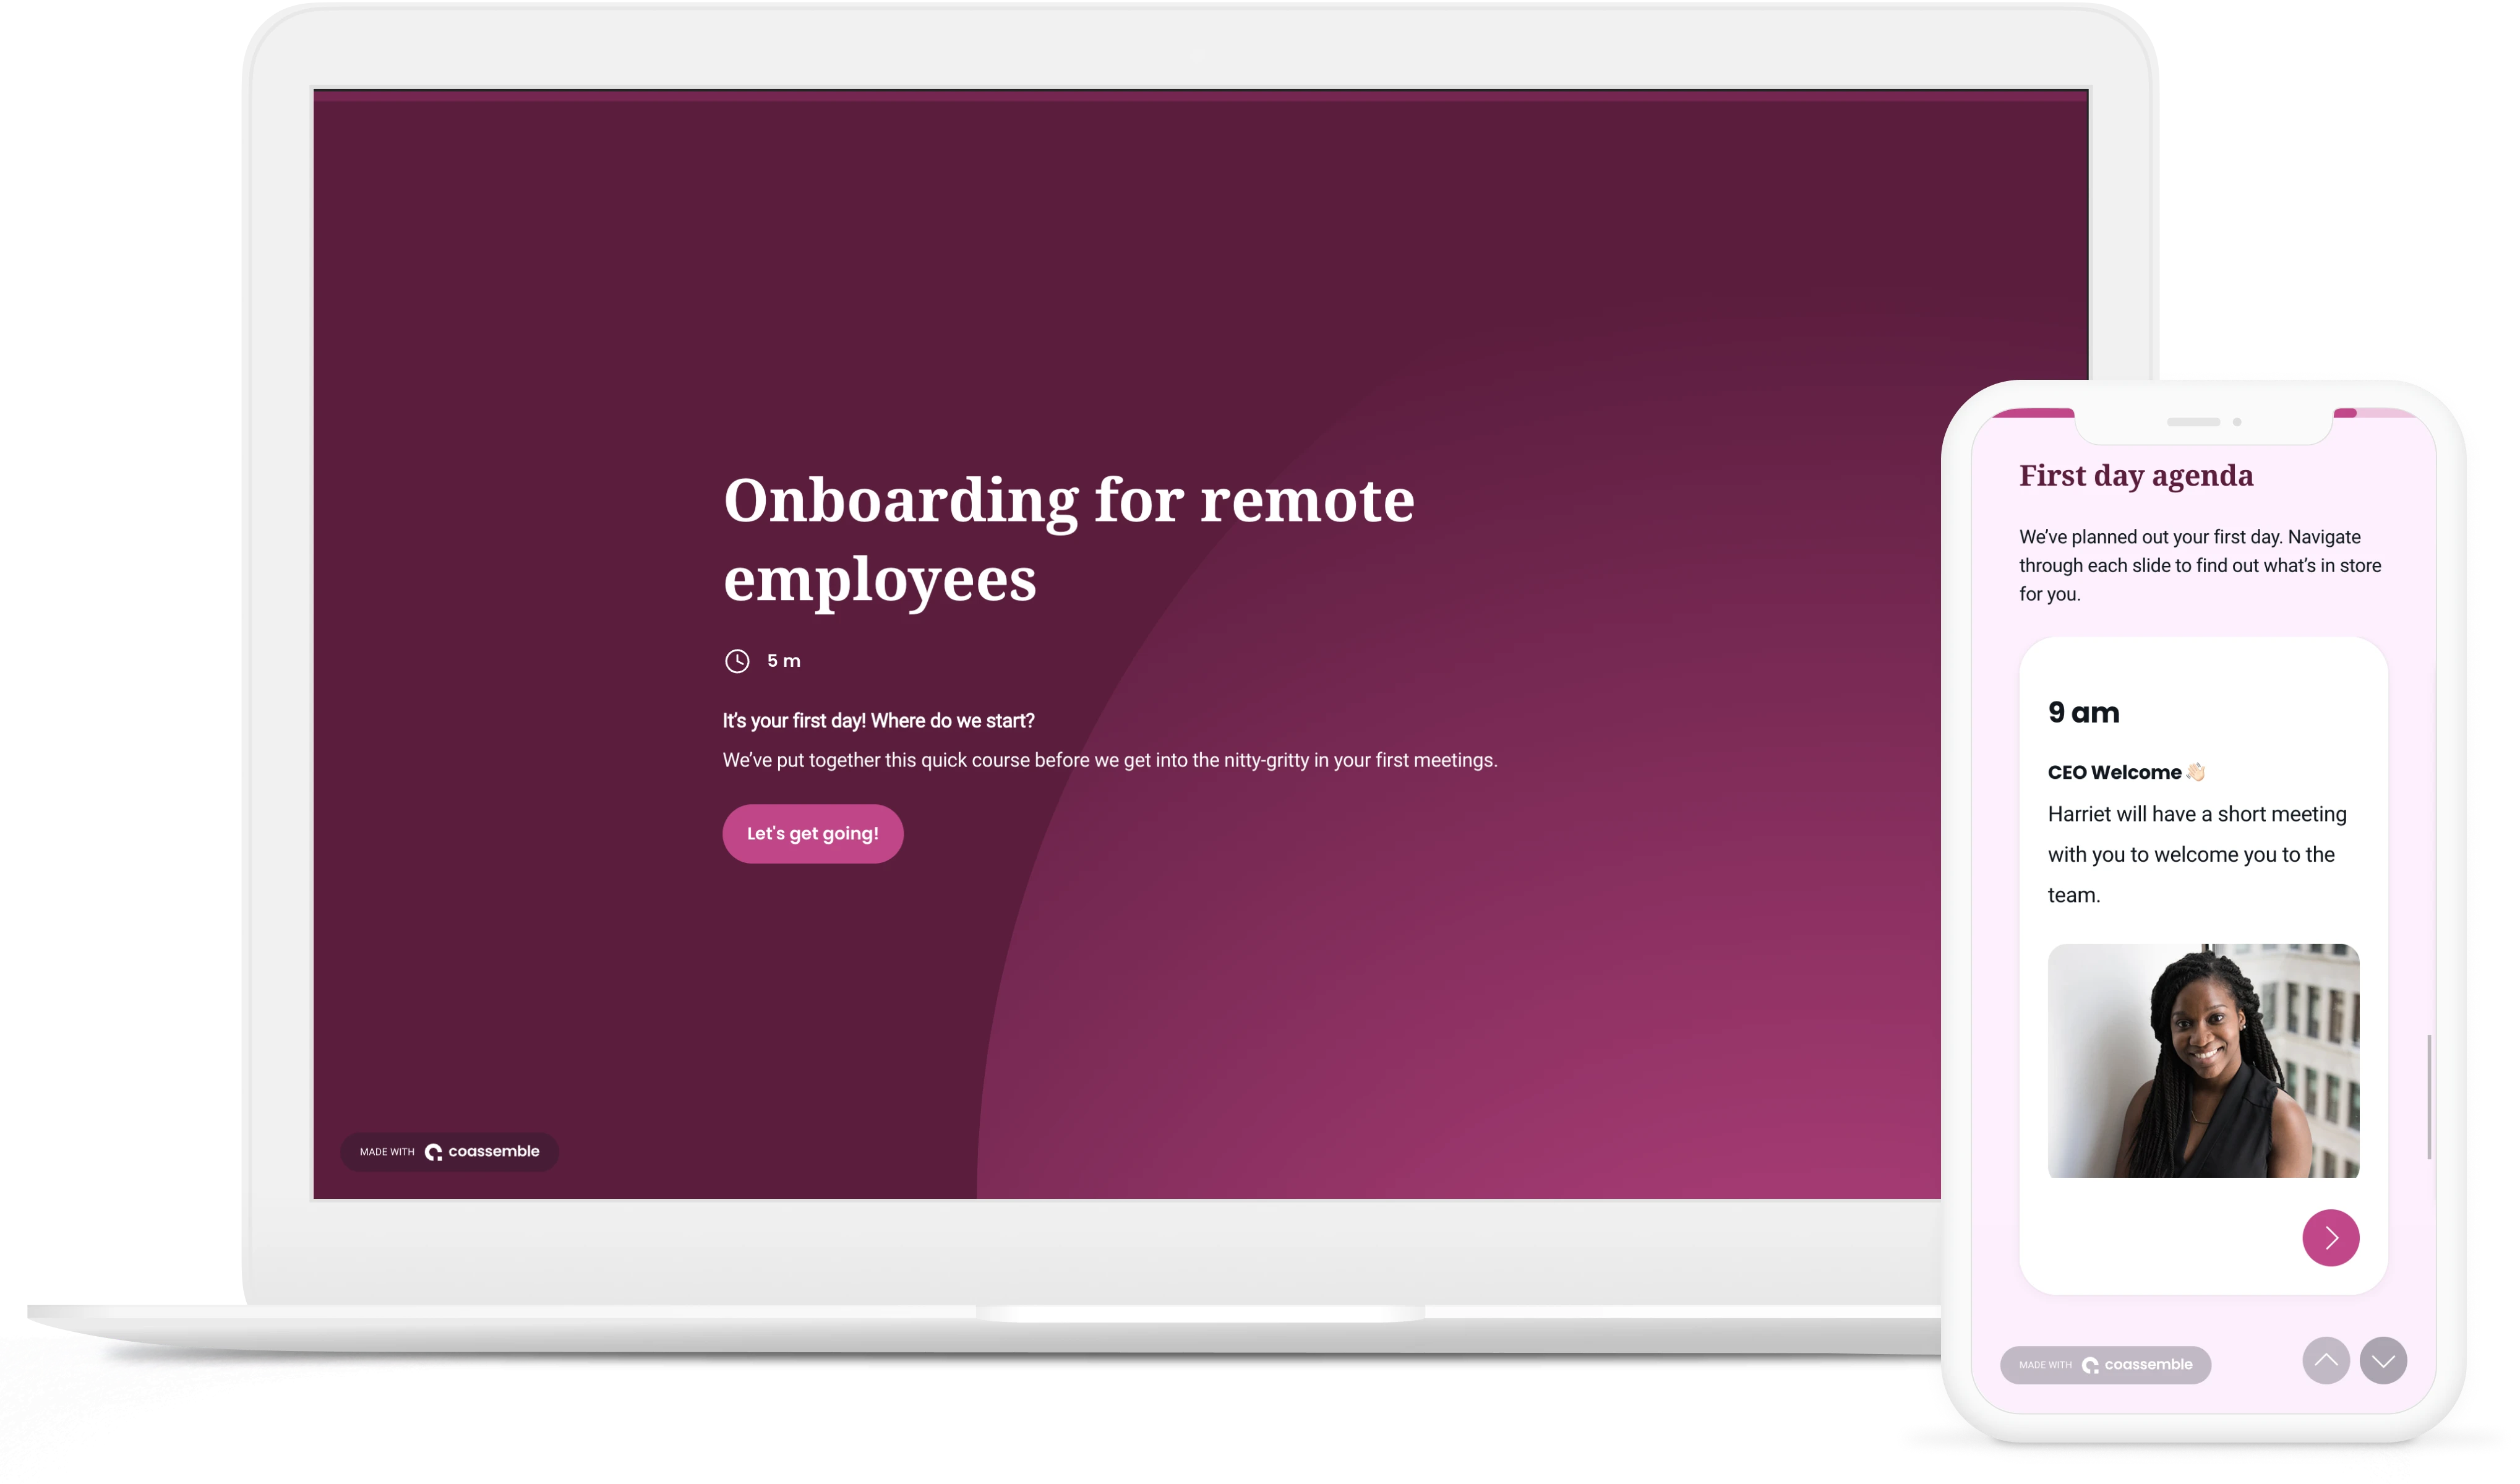 Onboarding remote employees